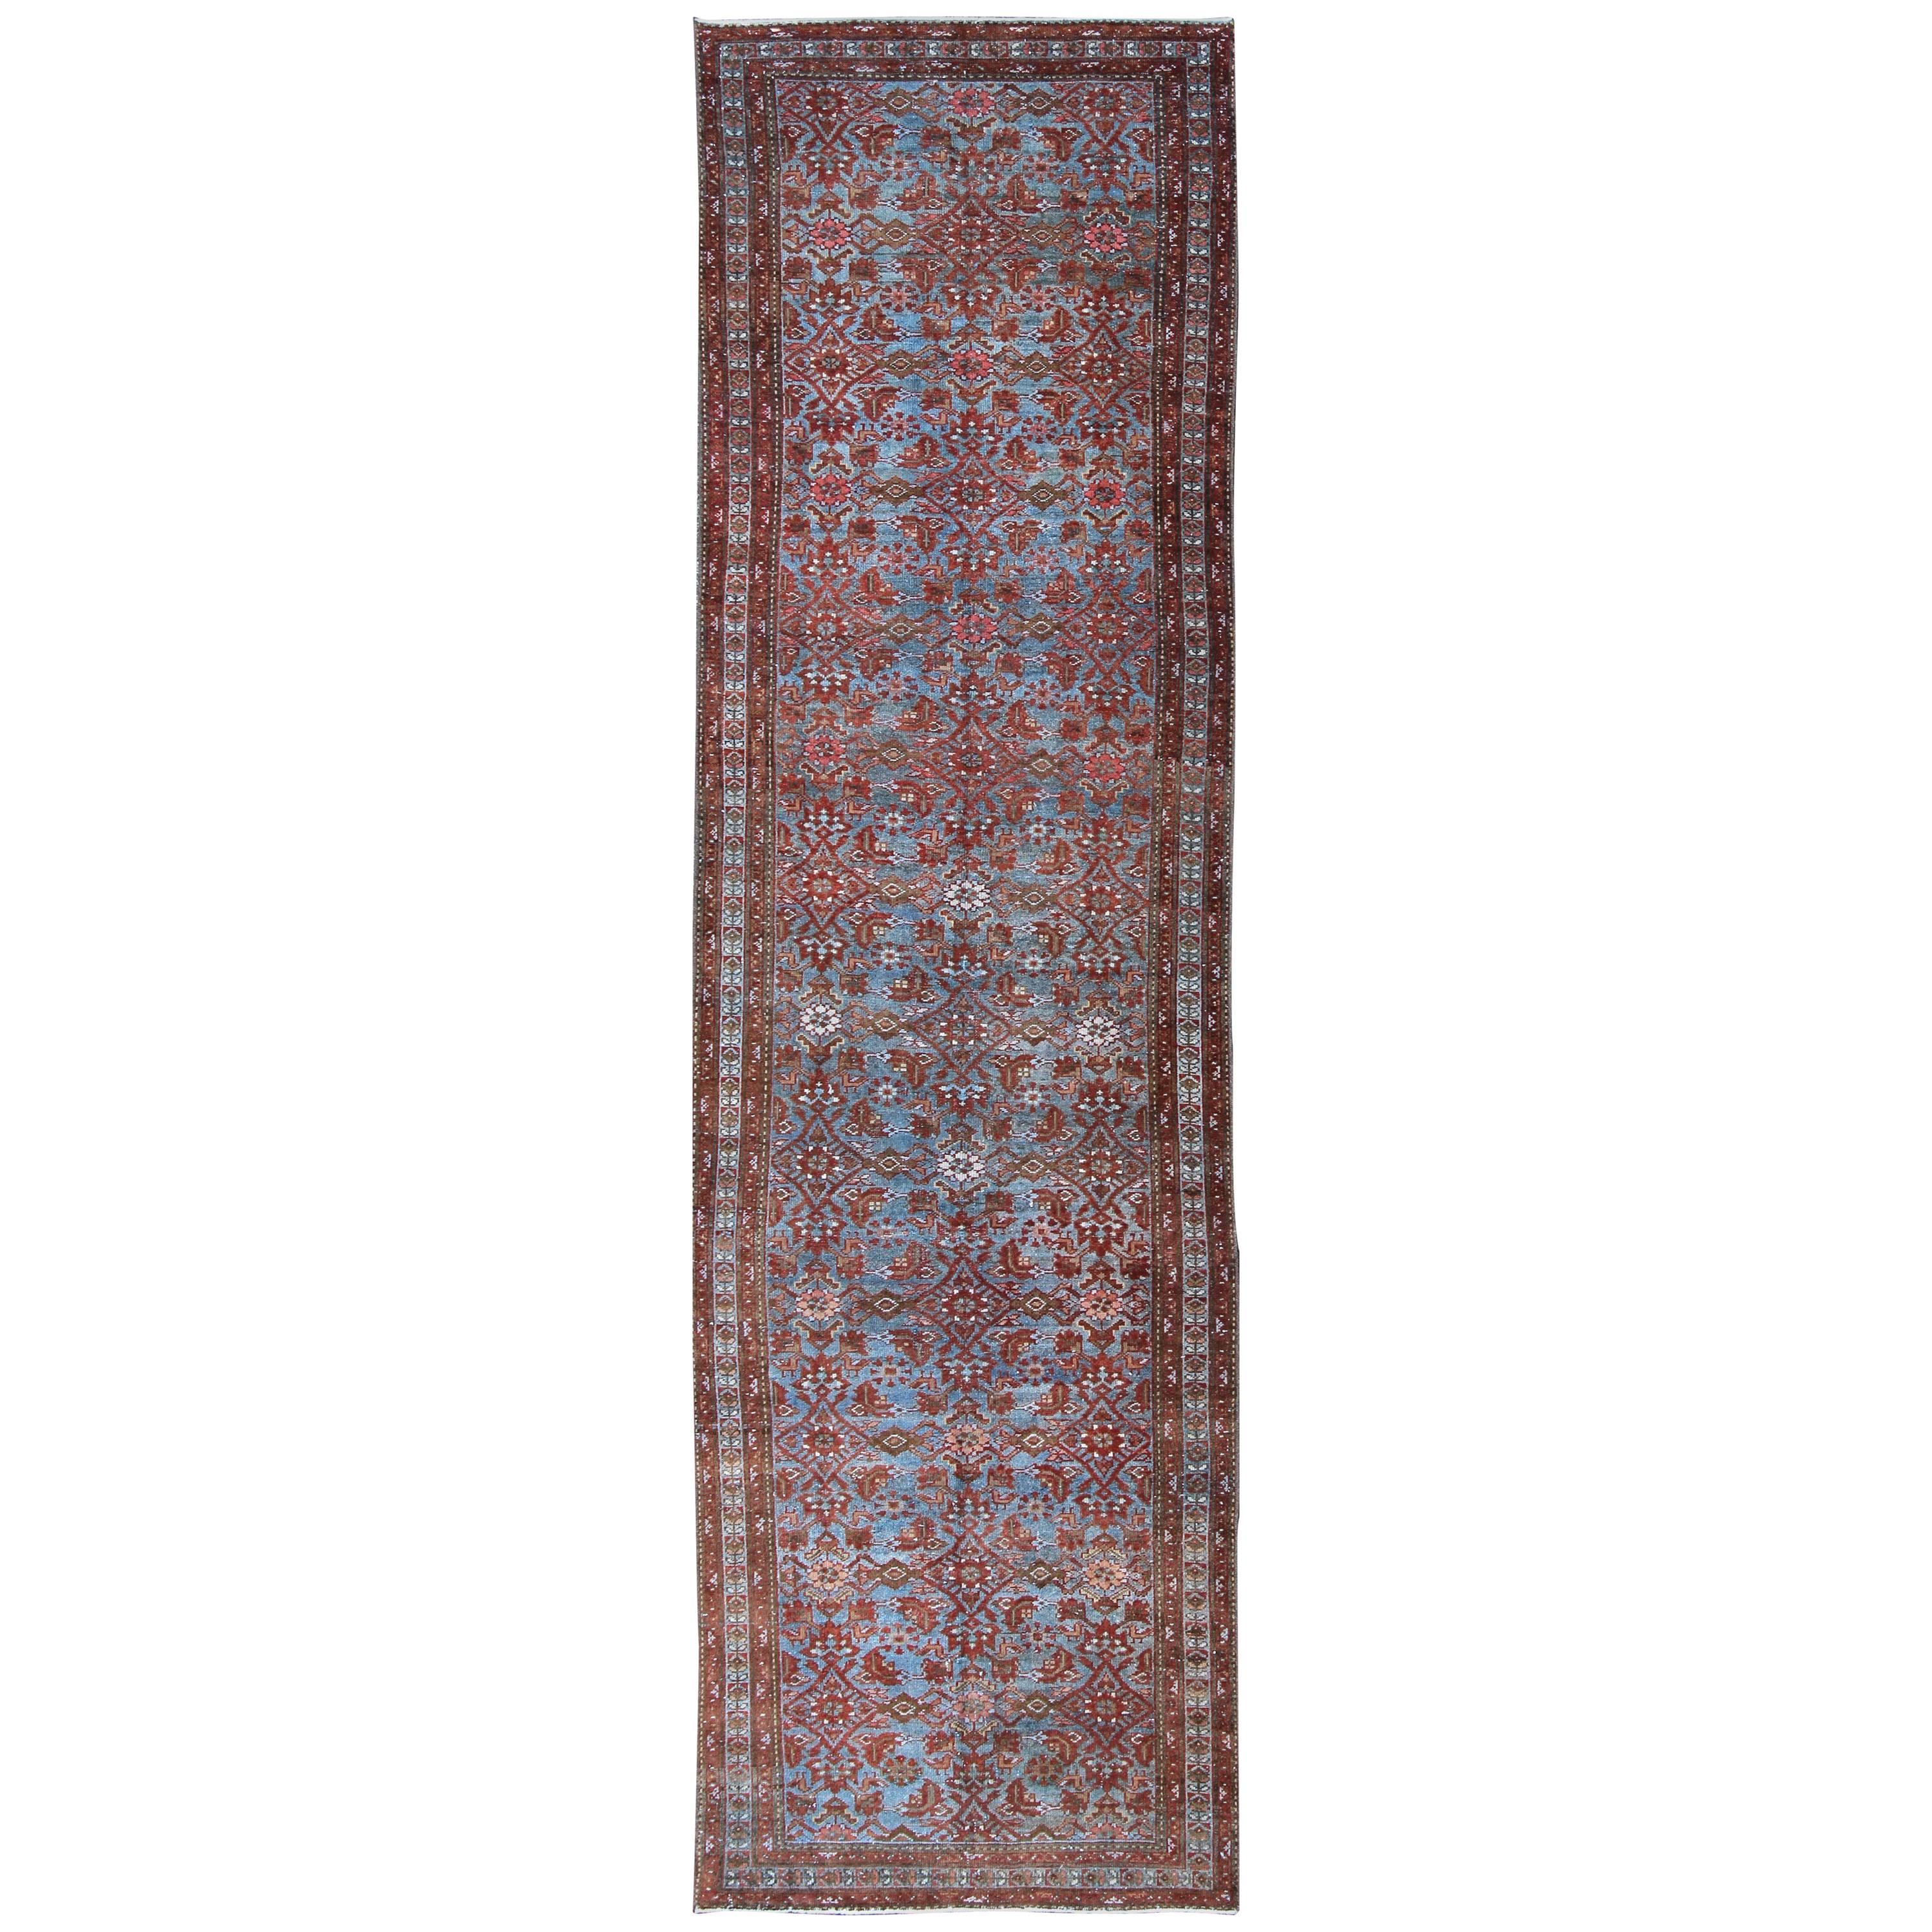 Persian Malayer Runner with Sub-Geometric Design in Blue, Red and Taupe